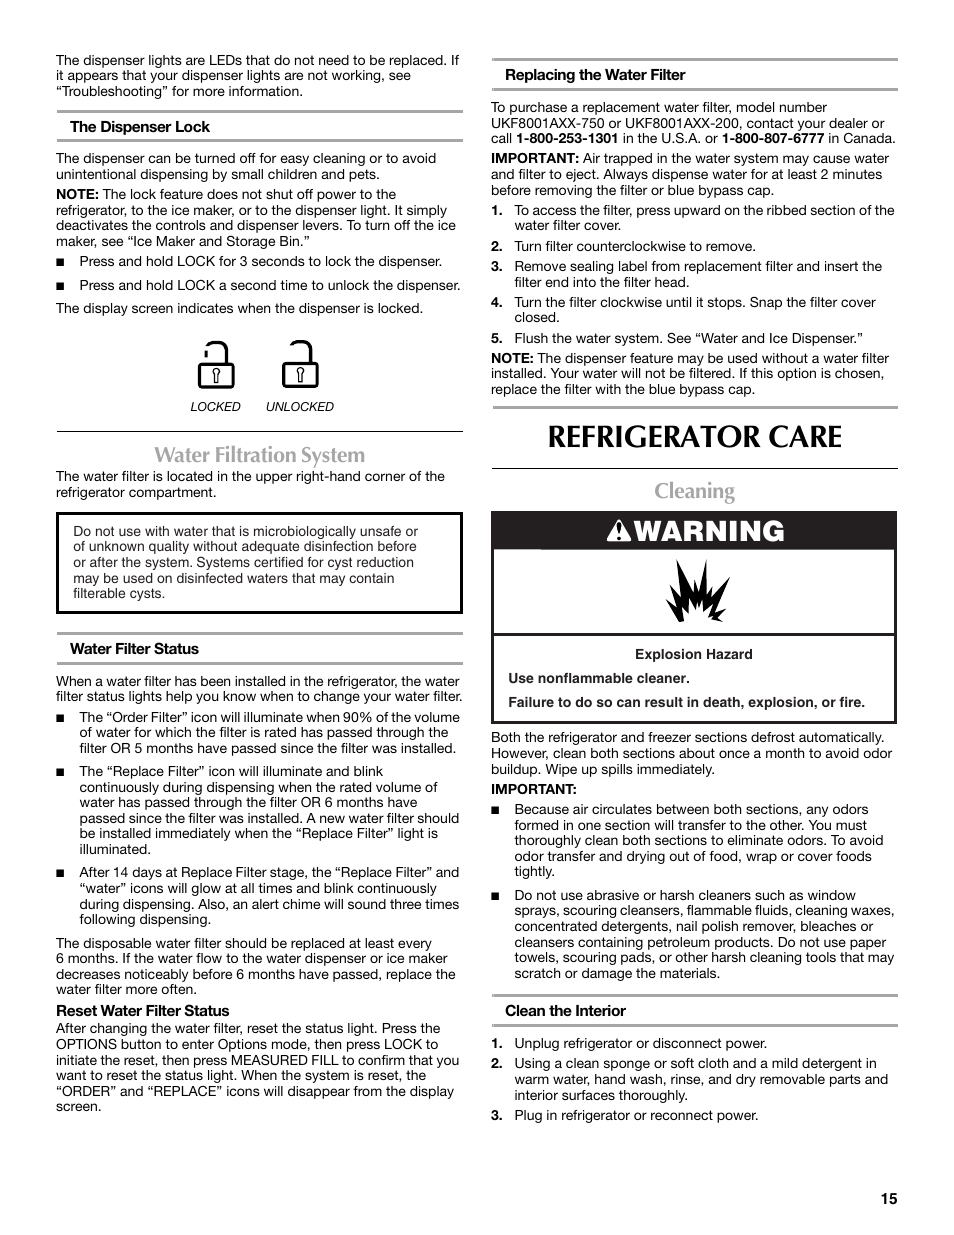 Refrigerator care, Warning, Water filtration system | Cleaning | Maytag MFX2570AEM User Manual | Page 15 / 70